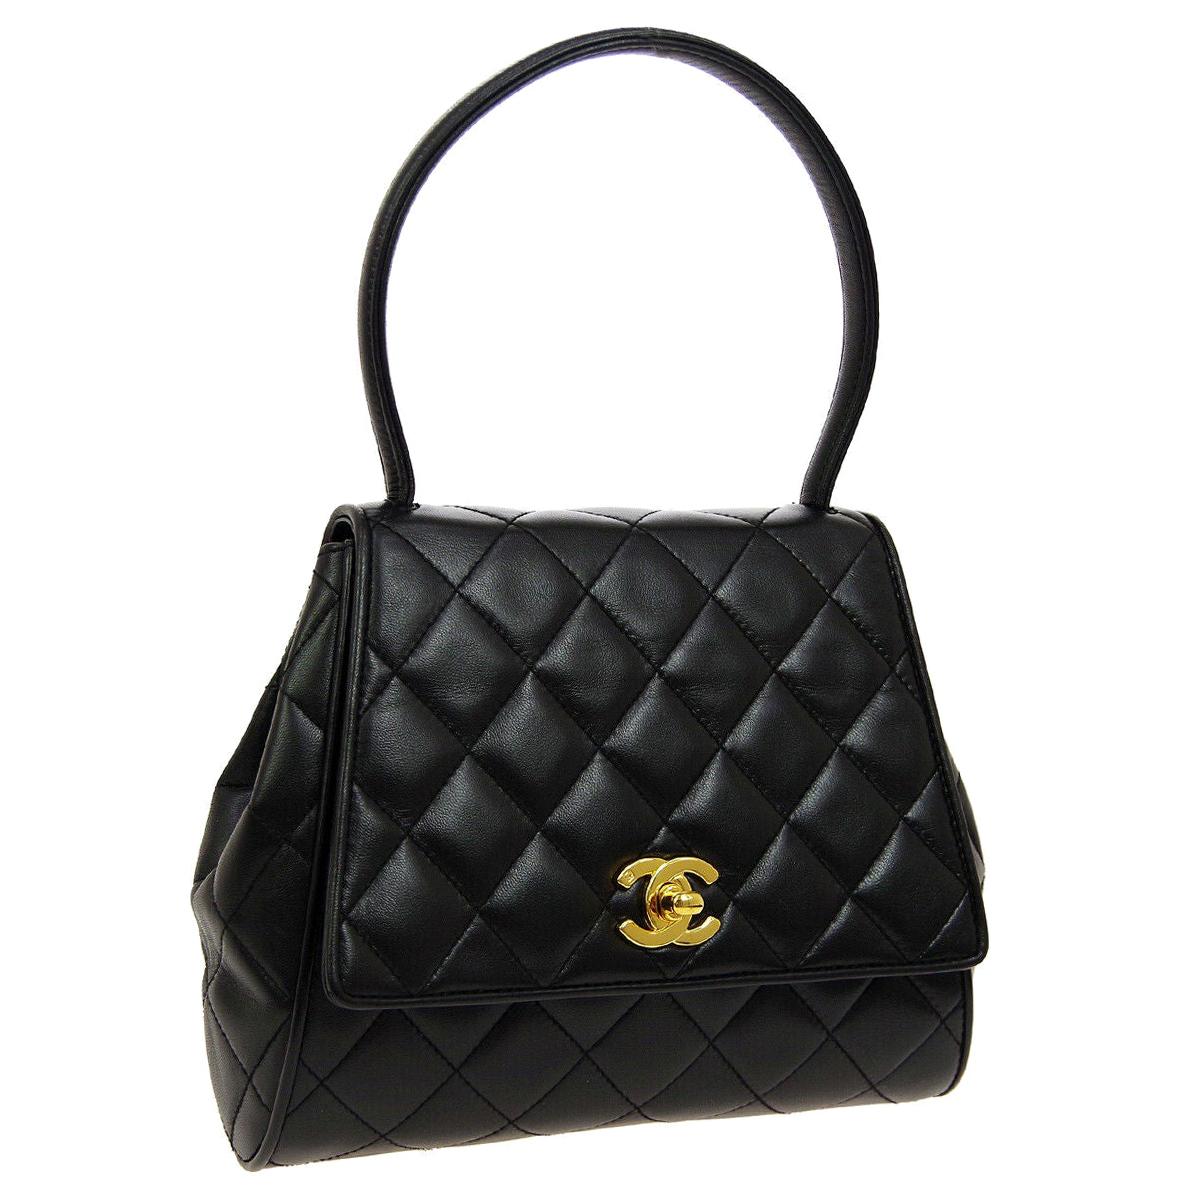 Chanel Black Leather Small Mini Kelly Style Evening Top Handle Satchel  Flap Bag